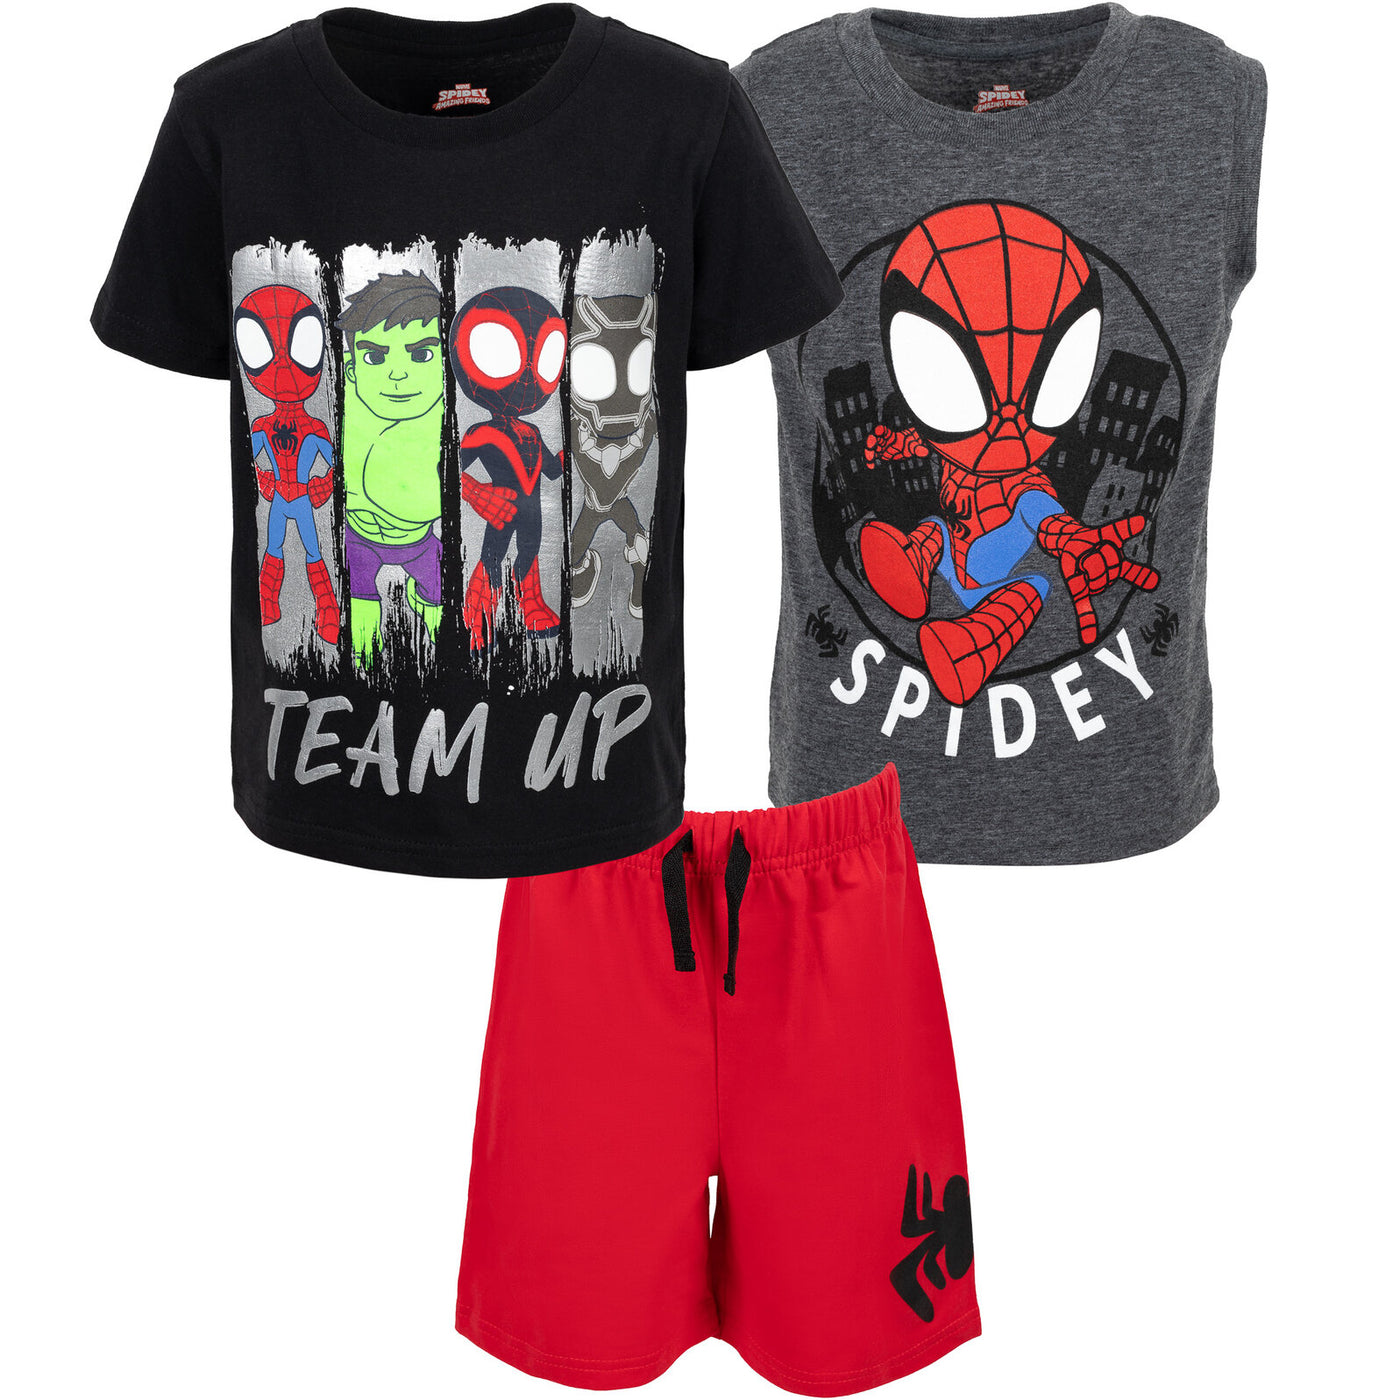 Marvel T-Shirt Tank Top and French Terry Shorts 3 Piece Outfit Set